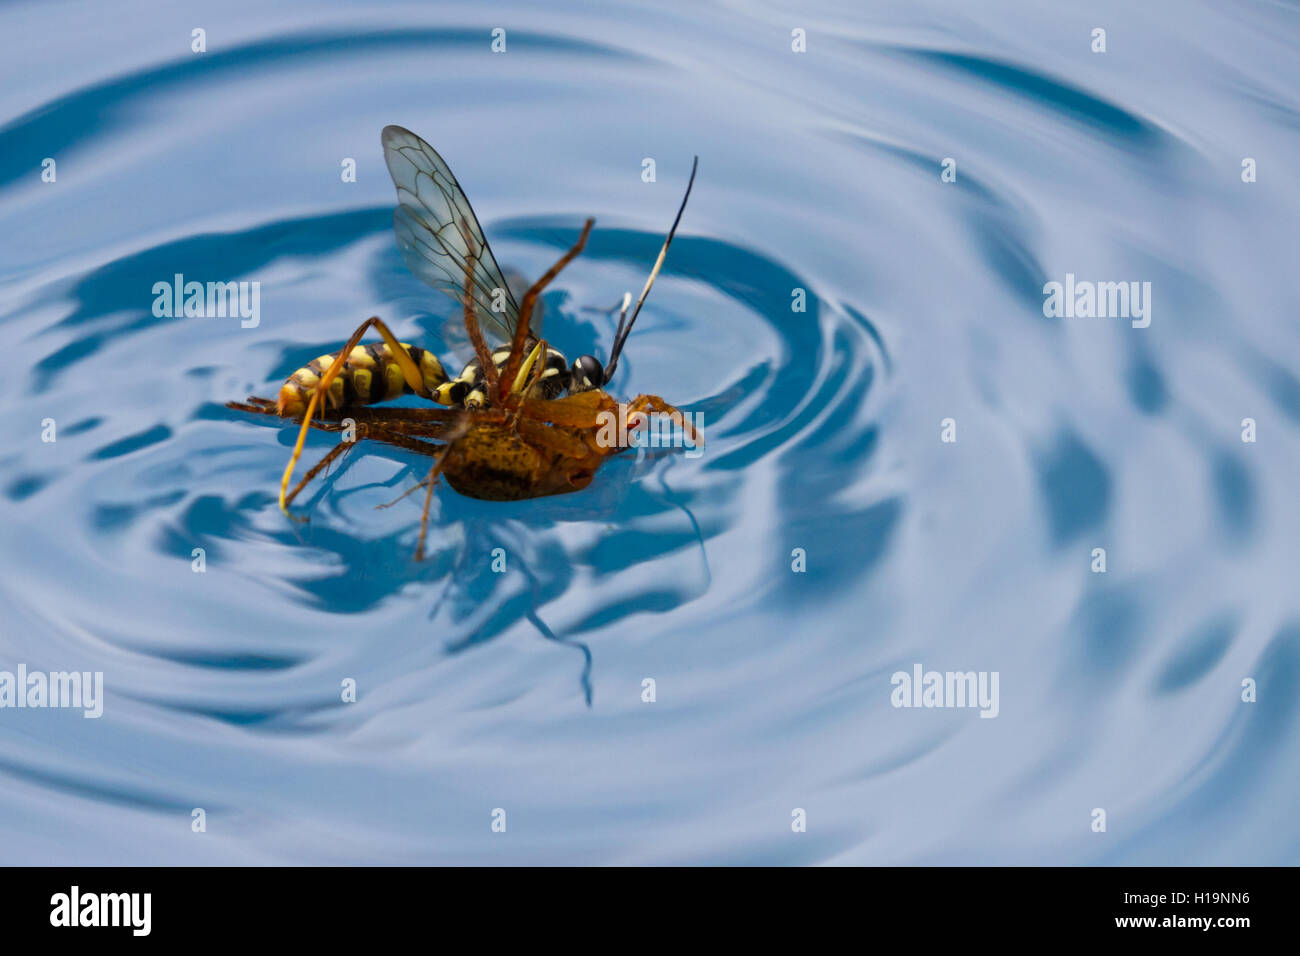 How Long Does It Take to Drown a Wasp 